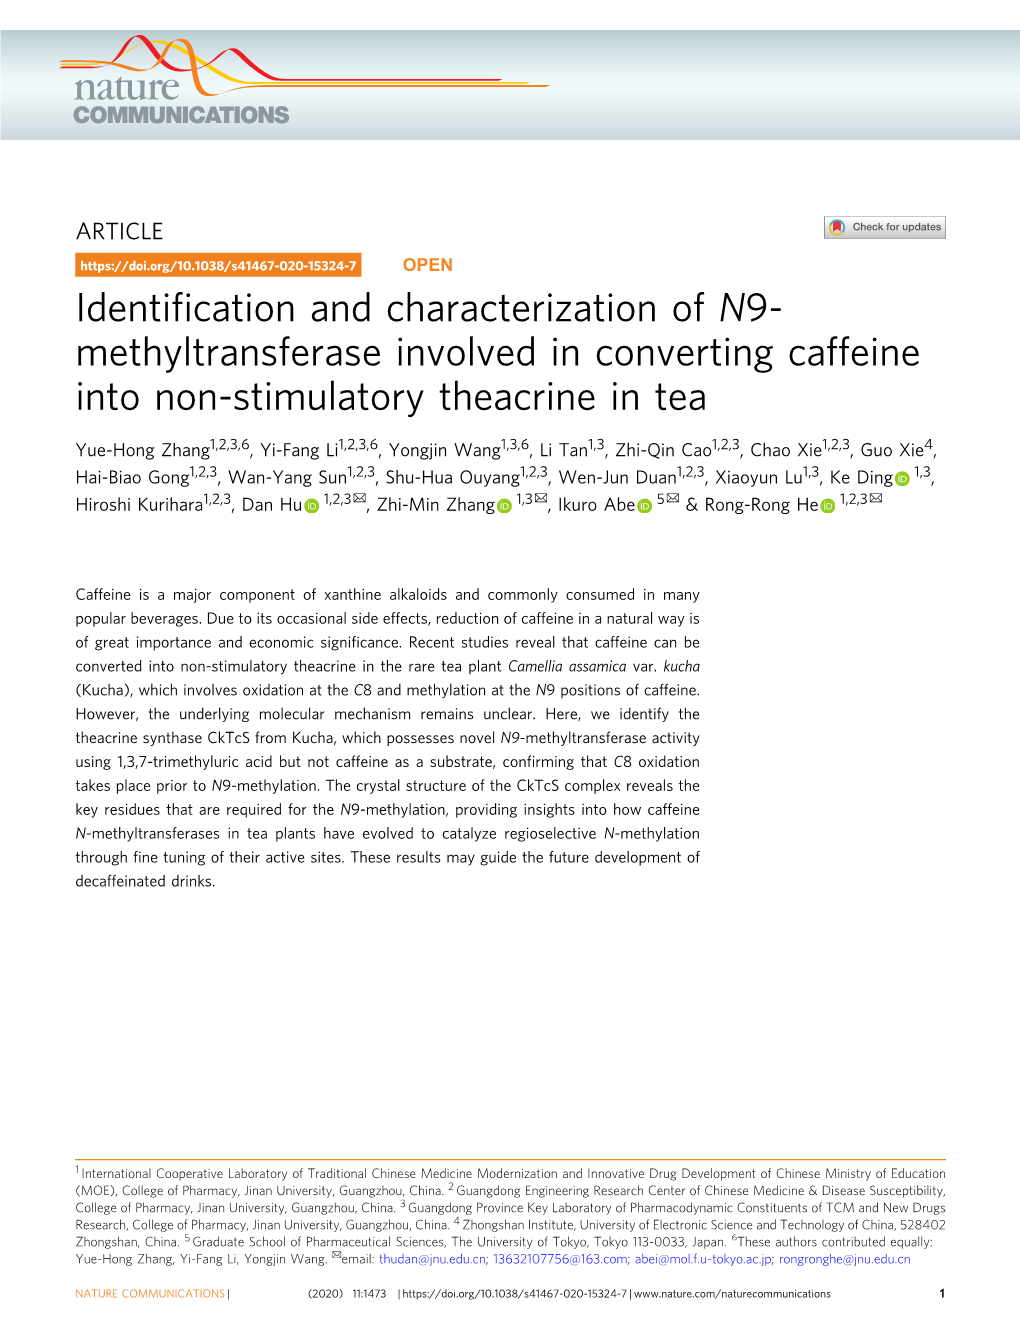 Identification and Characterization of N 9-Methyltransferase Involved In